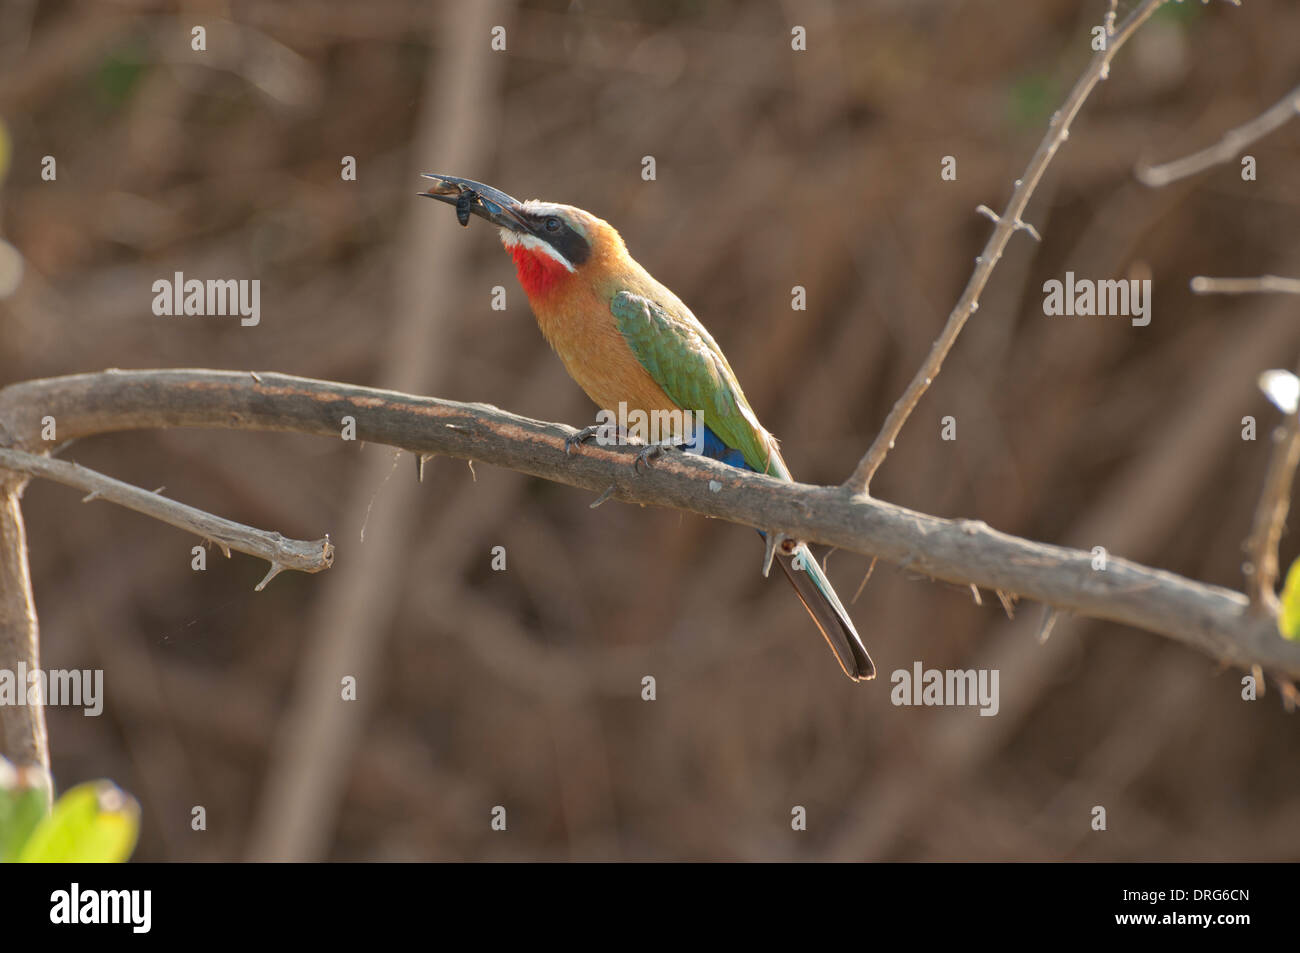 White-fronted bee-eater (Merops bullockoides). The bird has caught a large, dark bee. Stock Photo